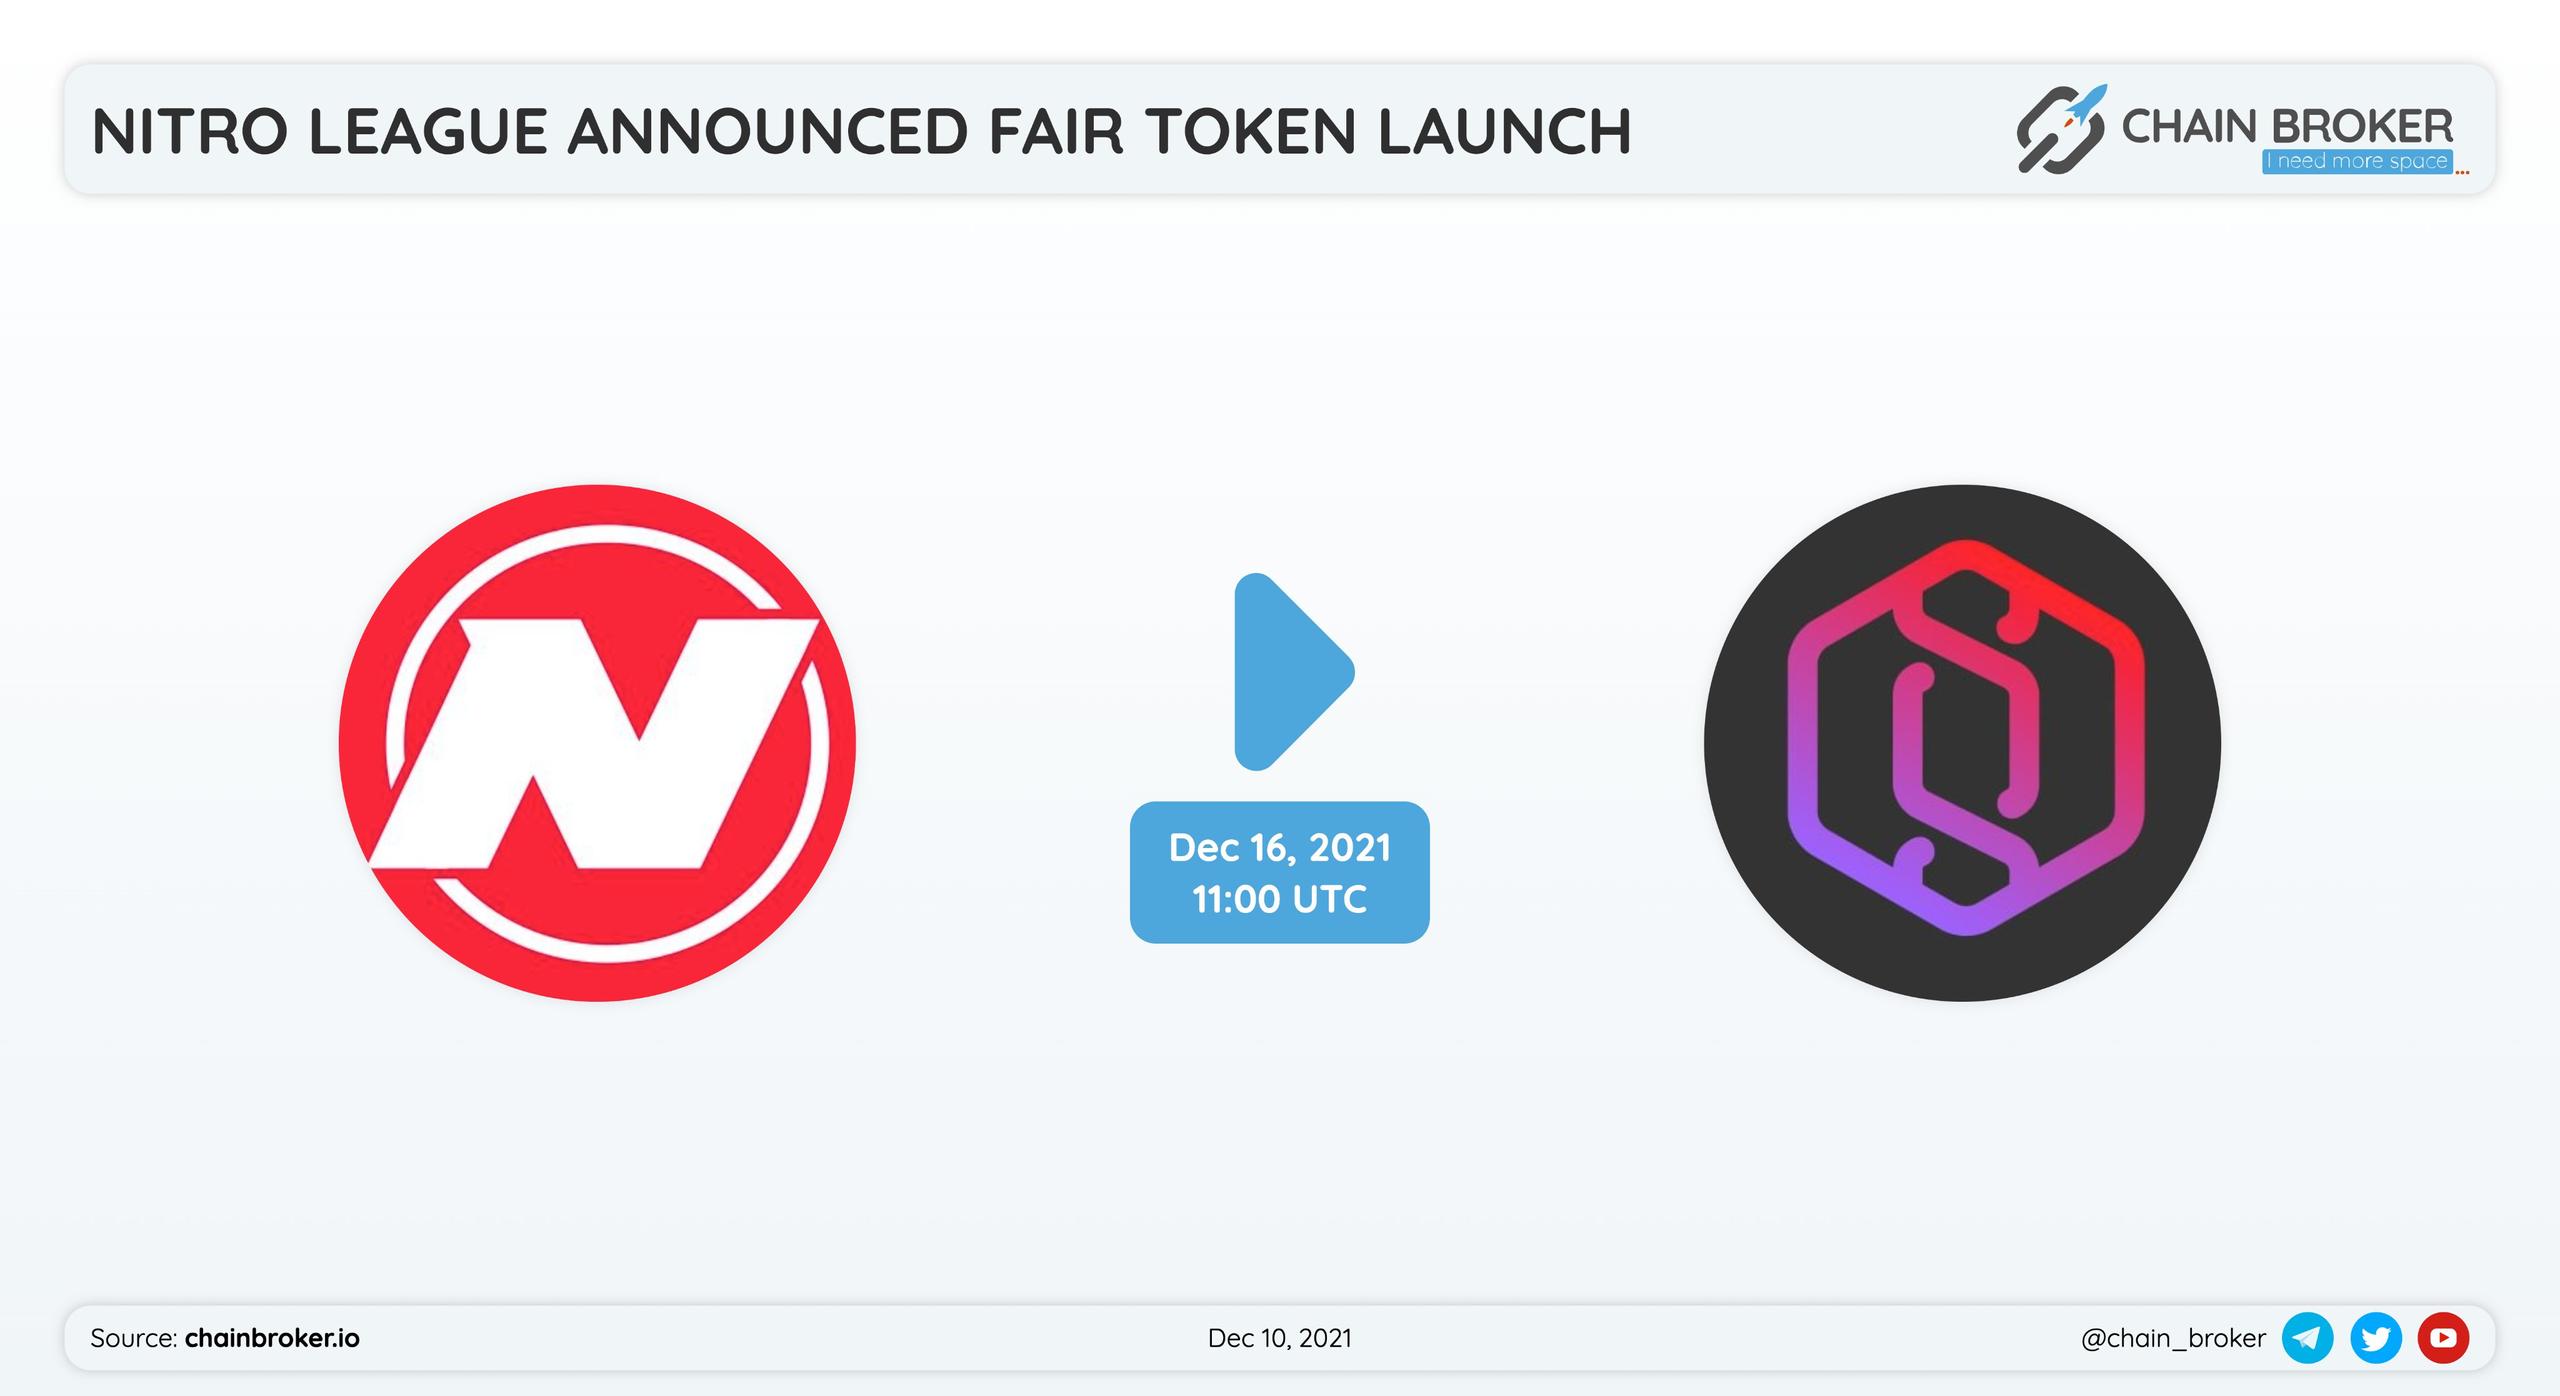 Nitro League has partnered with Polygen to conduct the fair launch event.